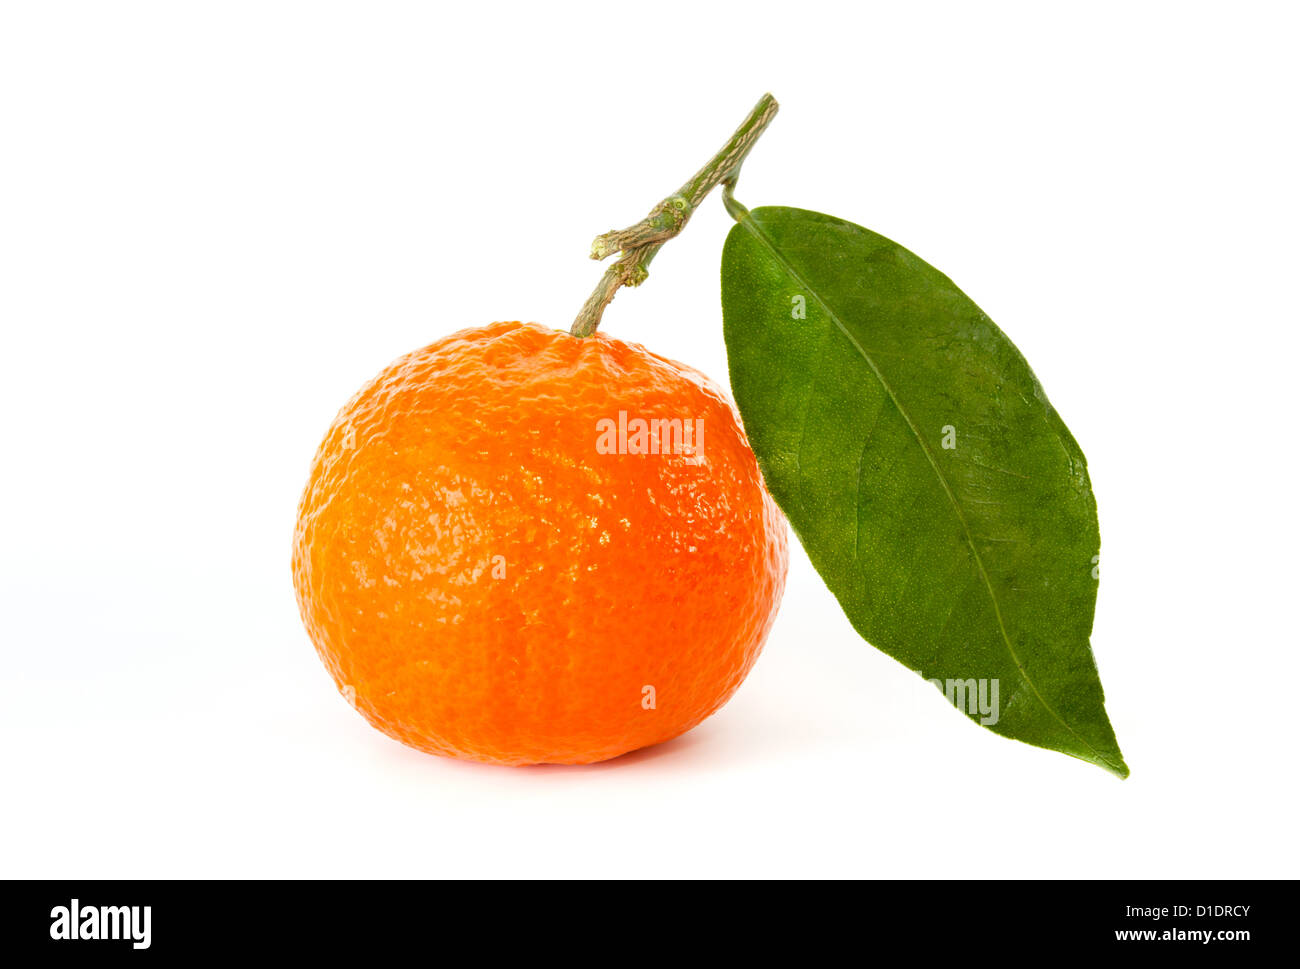 Tangerine with stem and leaf against a white background Stock Photo